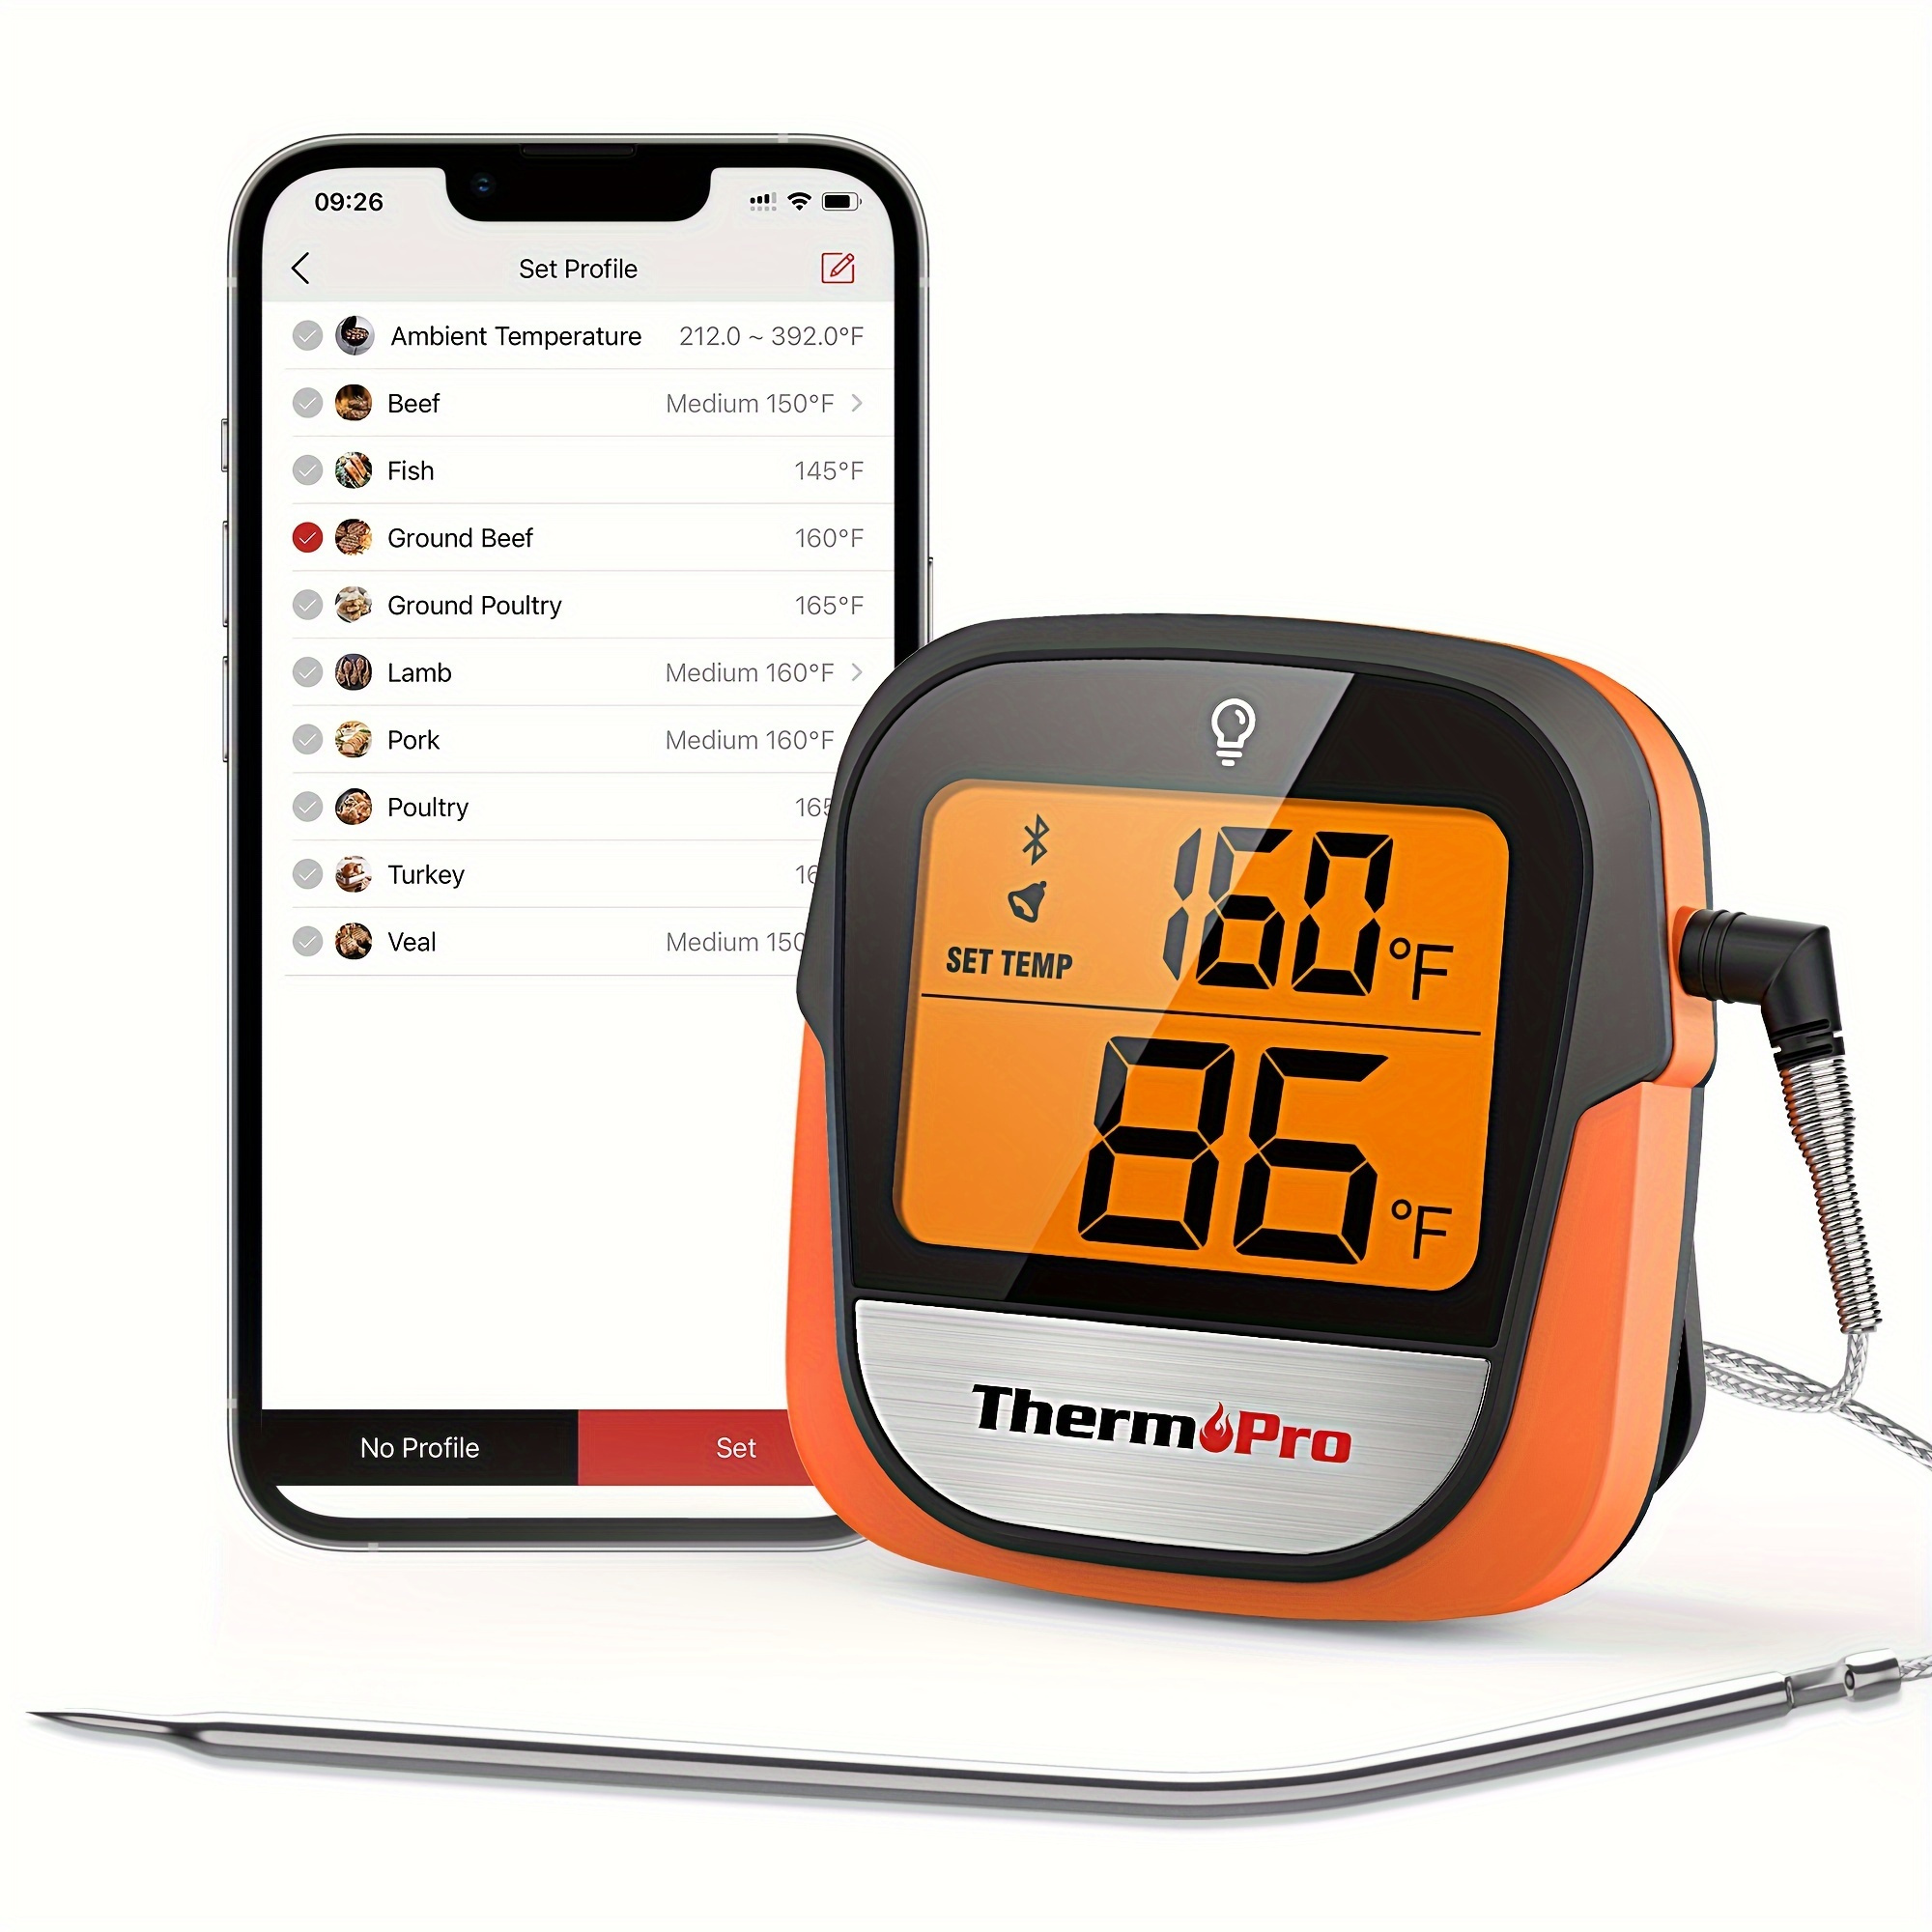 https://img.kwcdn.com/product/wireless-meat-thermometer/d69d2f15w98k18-f1a53517/Material/ImageCut/bcc3ea08-788e-4a78-9ce0-526de3a10198.jpg